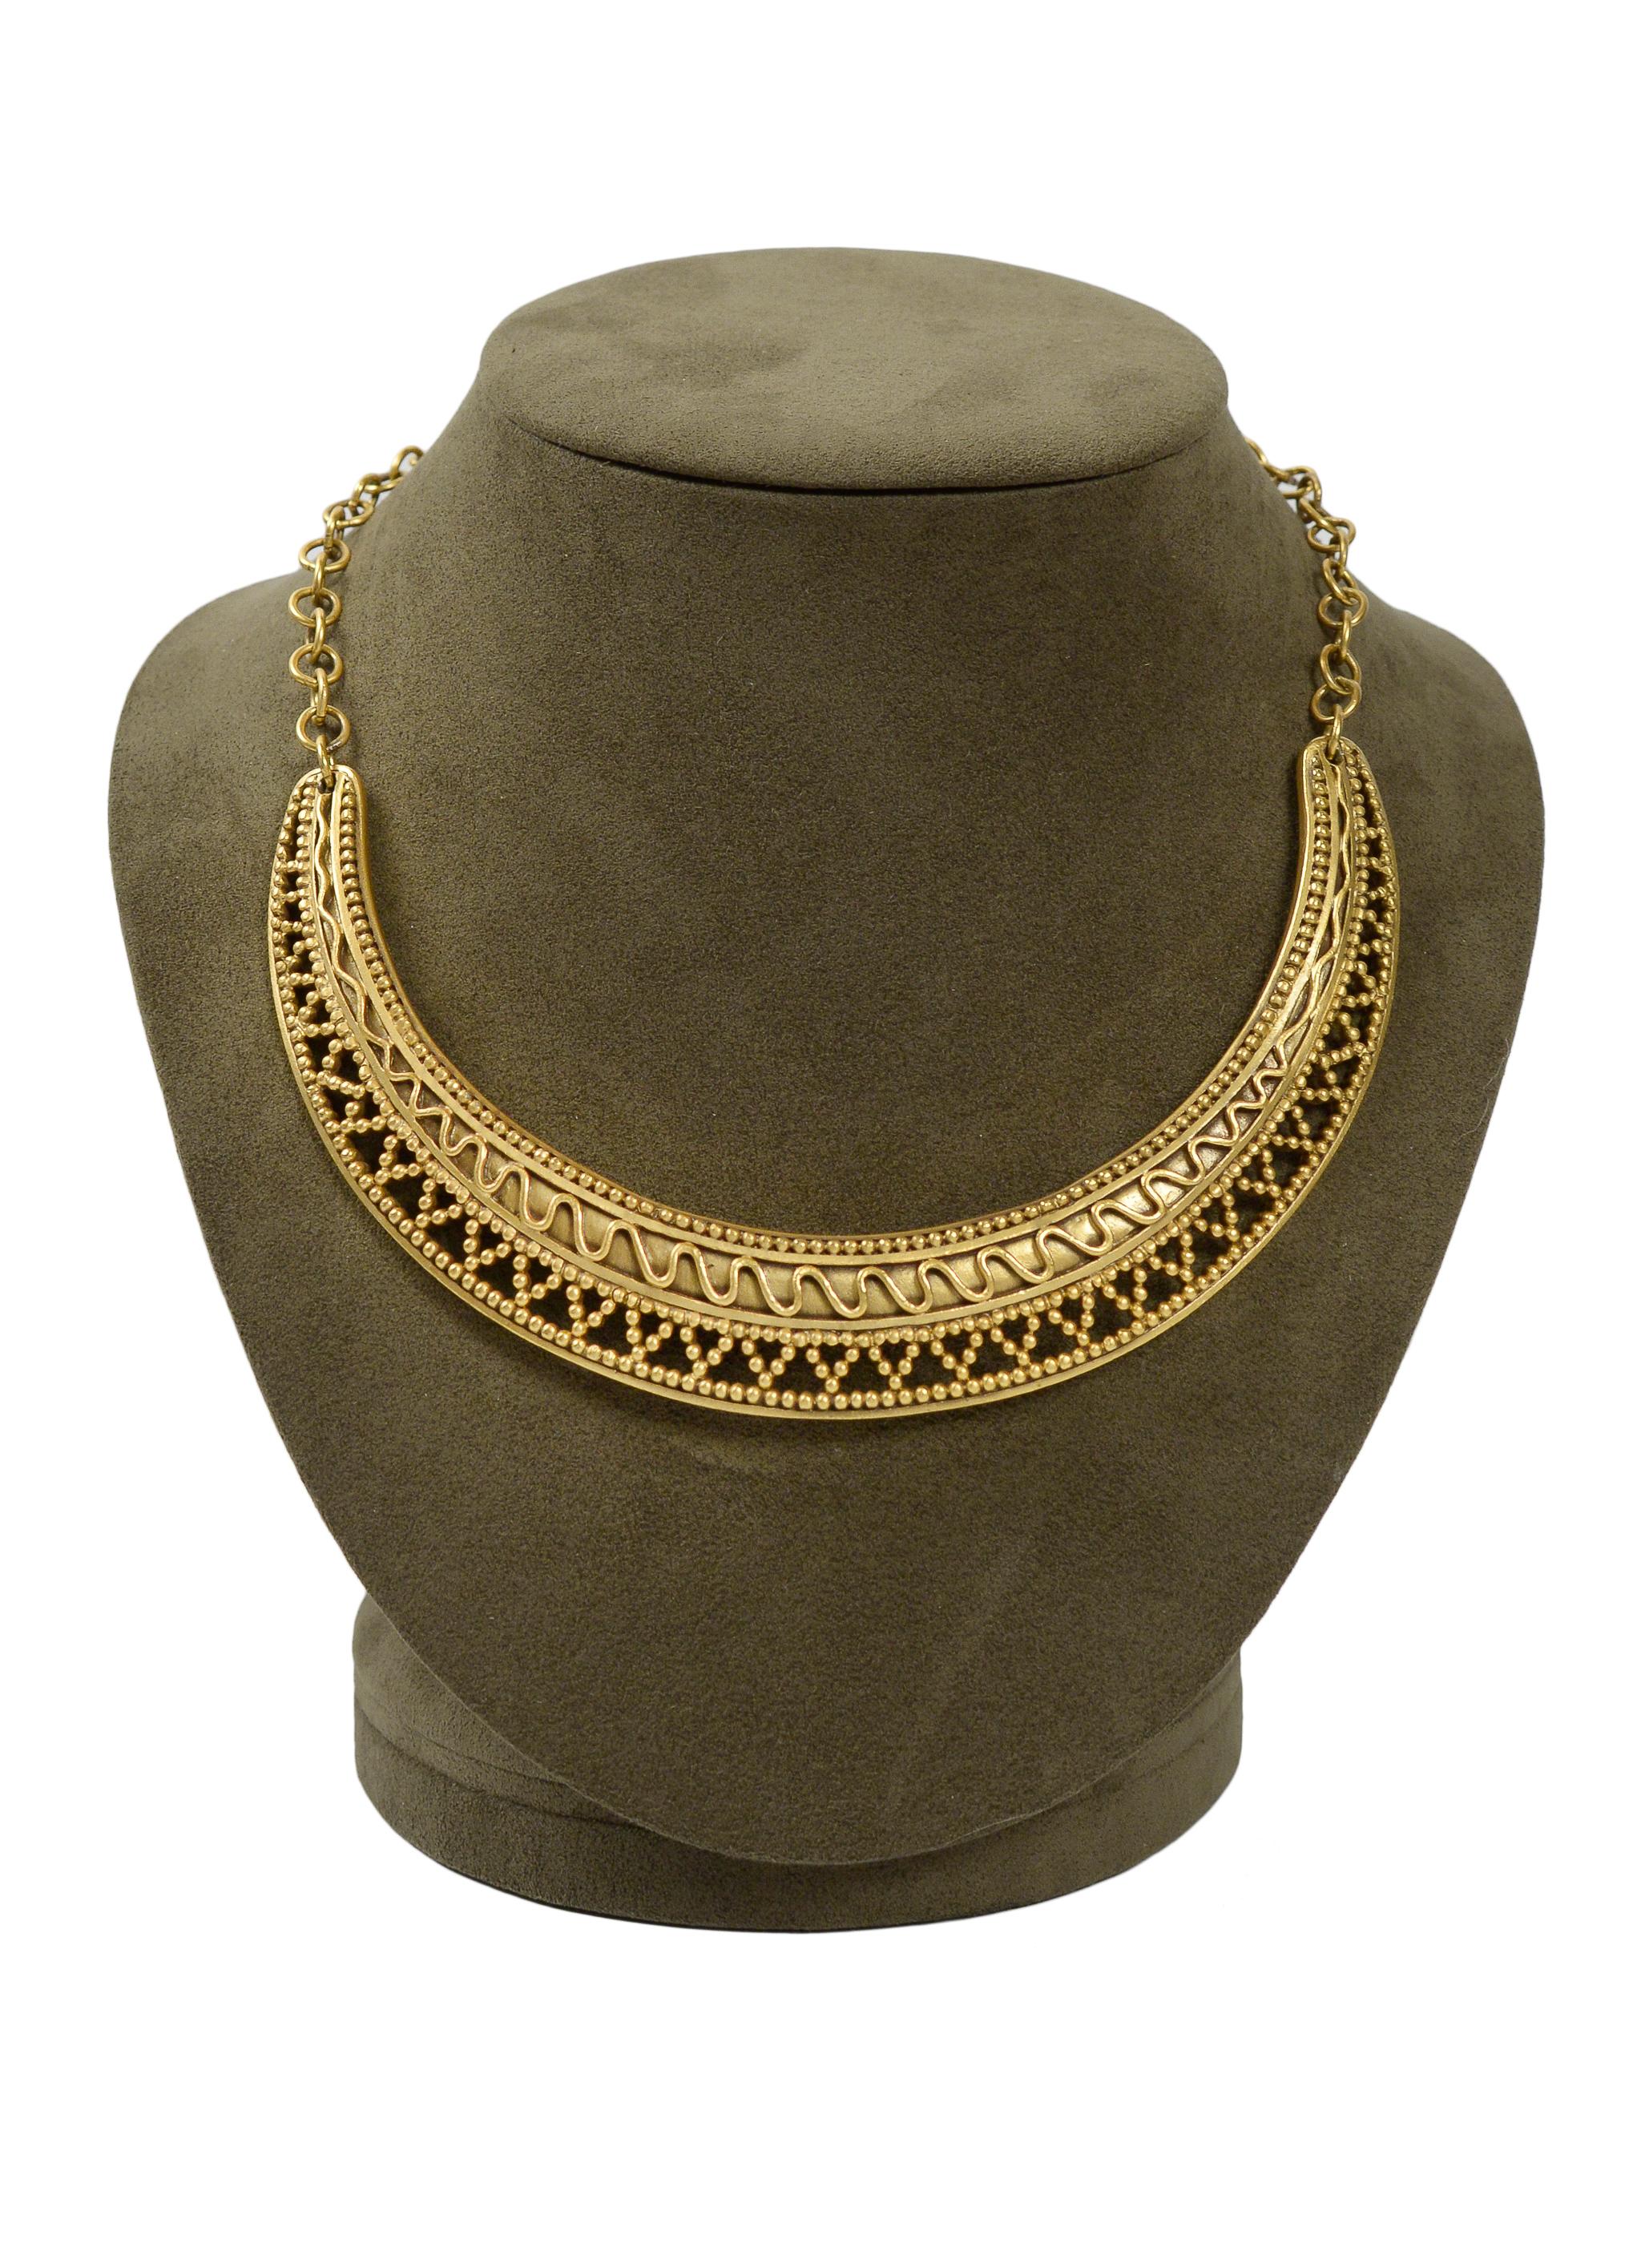 Resurrection Vintage is excited to offer a vintage Yves Saint Laurent YSL metal gold-tone crescent collar necklace with bead detail and etching. Stamped YSL. 

Yves Saint Laurent
One Size 
Metal
Stamped YSL
Excellent Vintage Condition
Authenticity